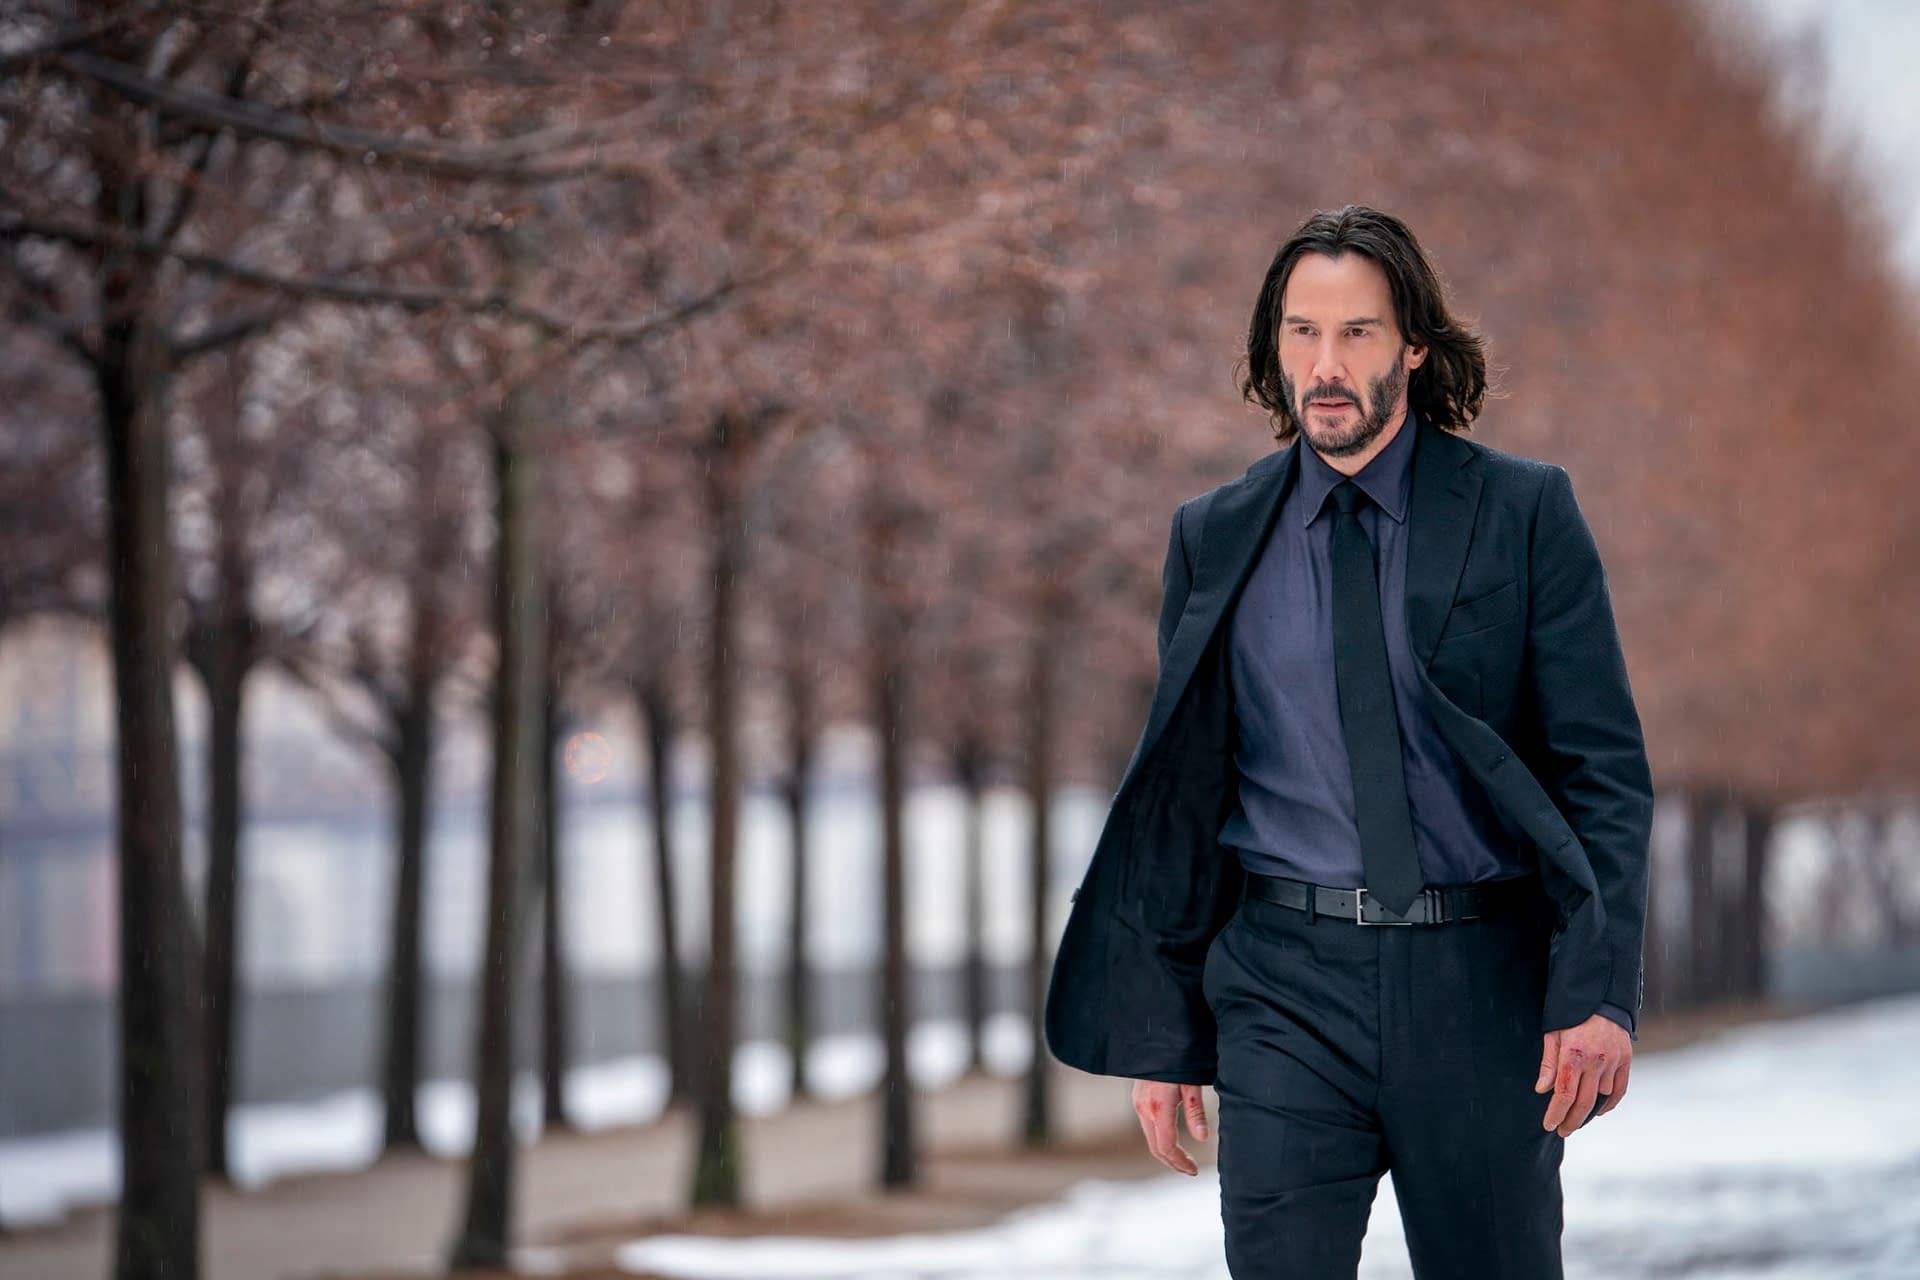 Keanu Reeves and Cast Receive 'John Wick: Chapter 4' Character Posters